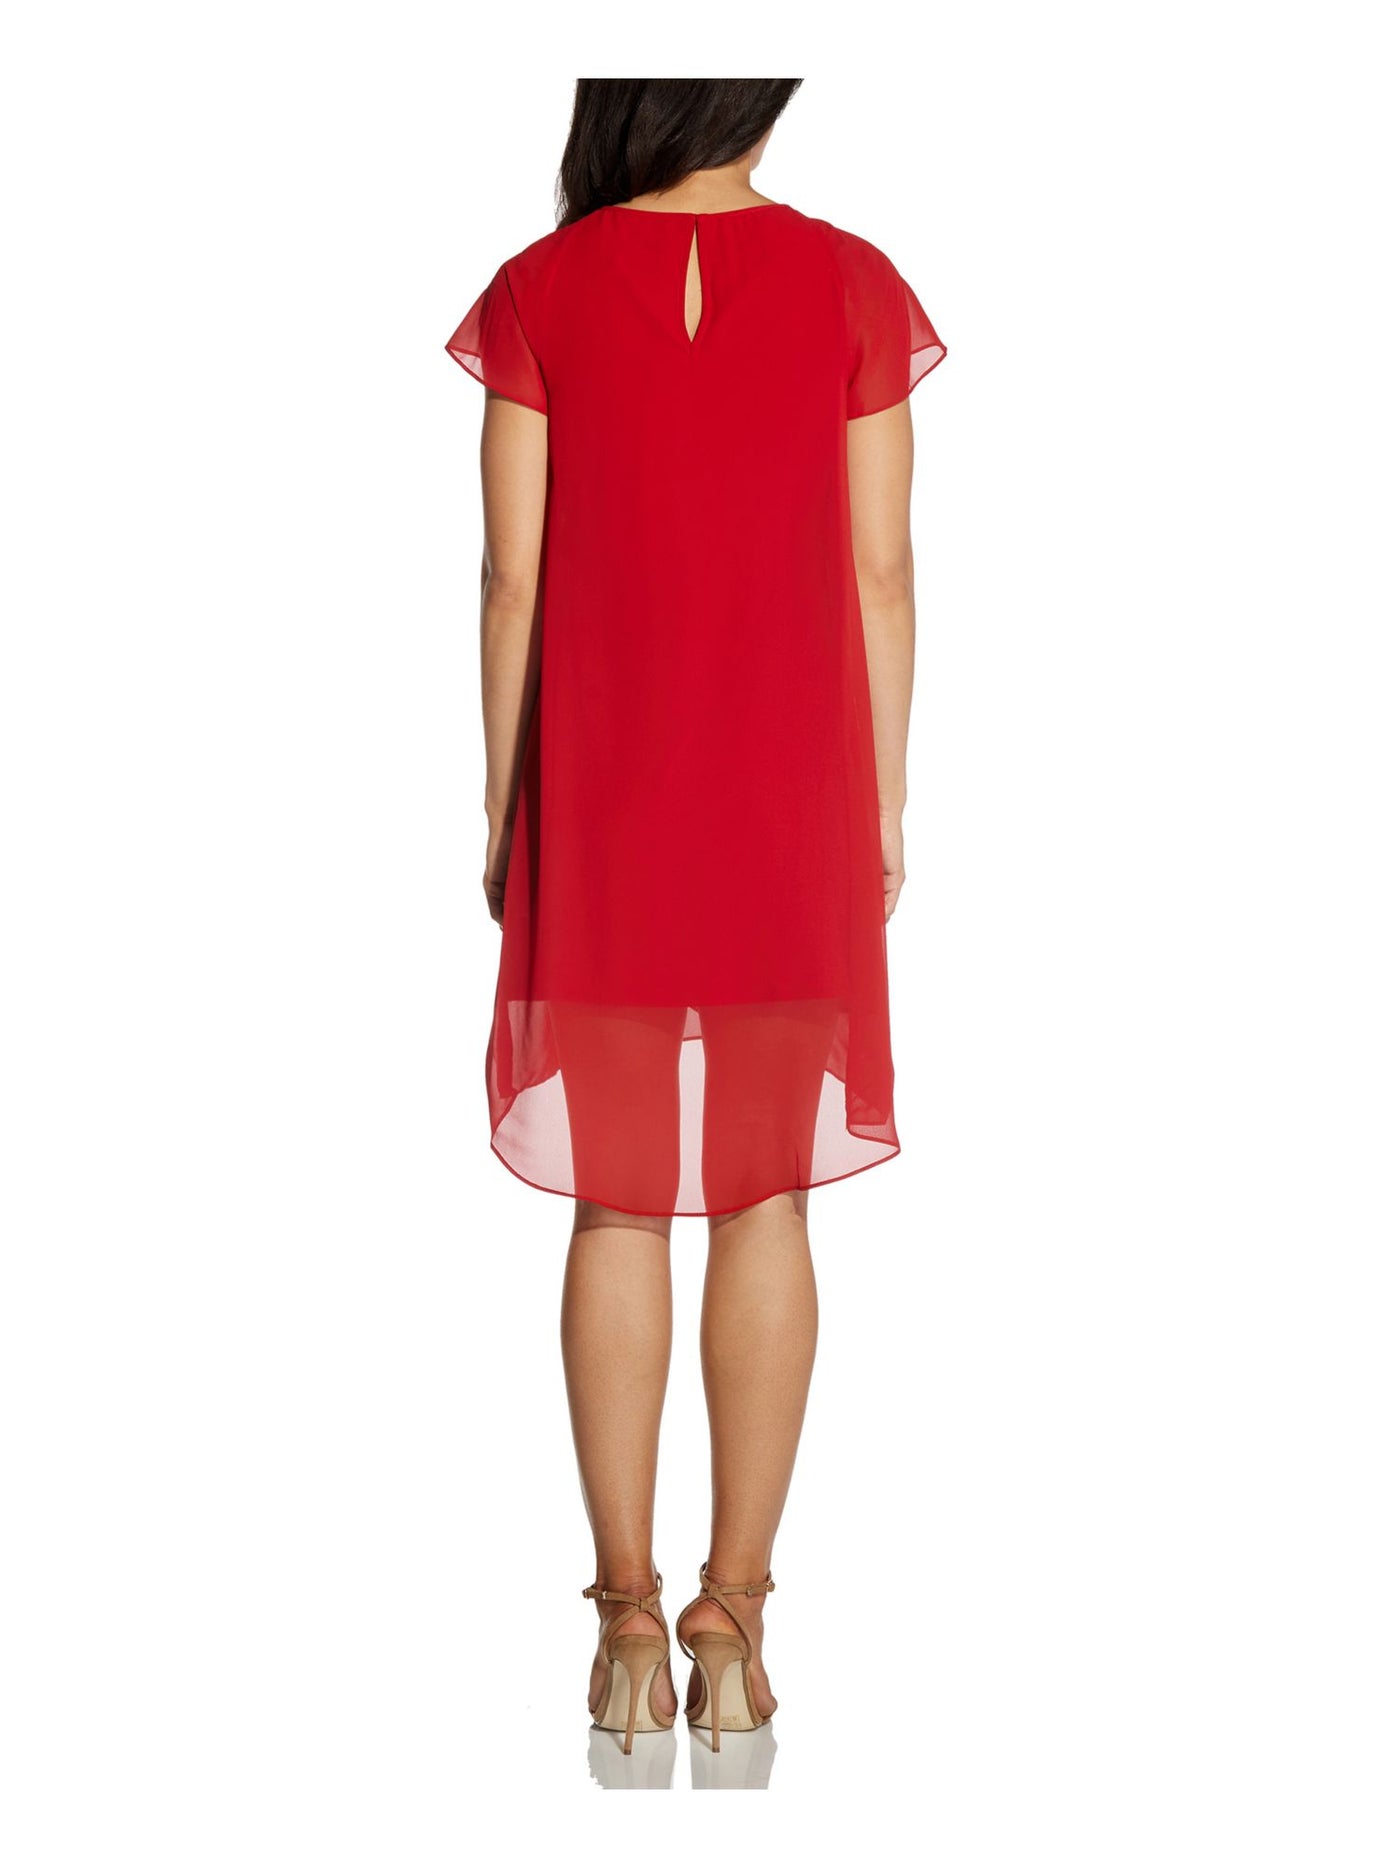 ADRIANNA PAPELL Womens Sheer Keyhole Hook-and-eye Closure Flutter Sleeve Crew Neck Above The Knee Hi-Lo Dress